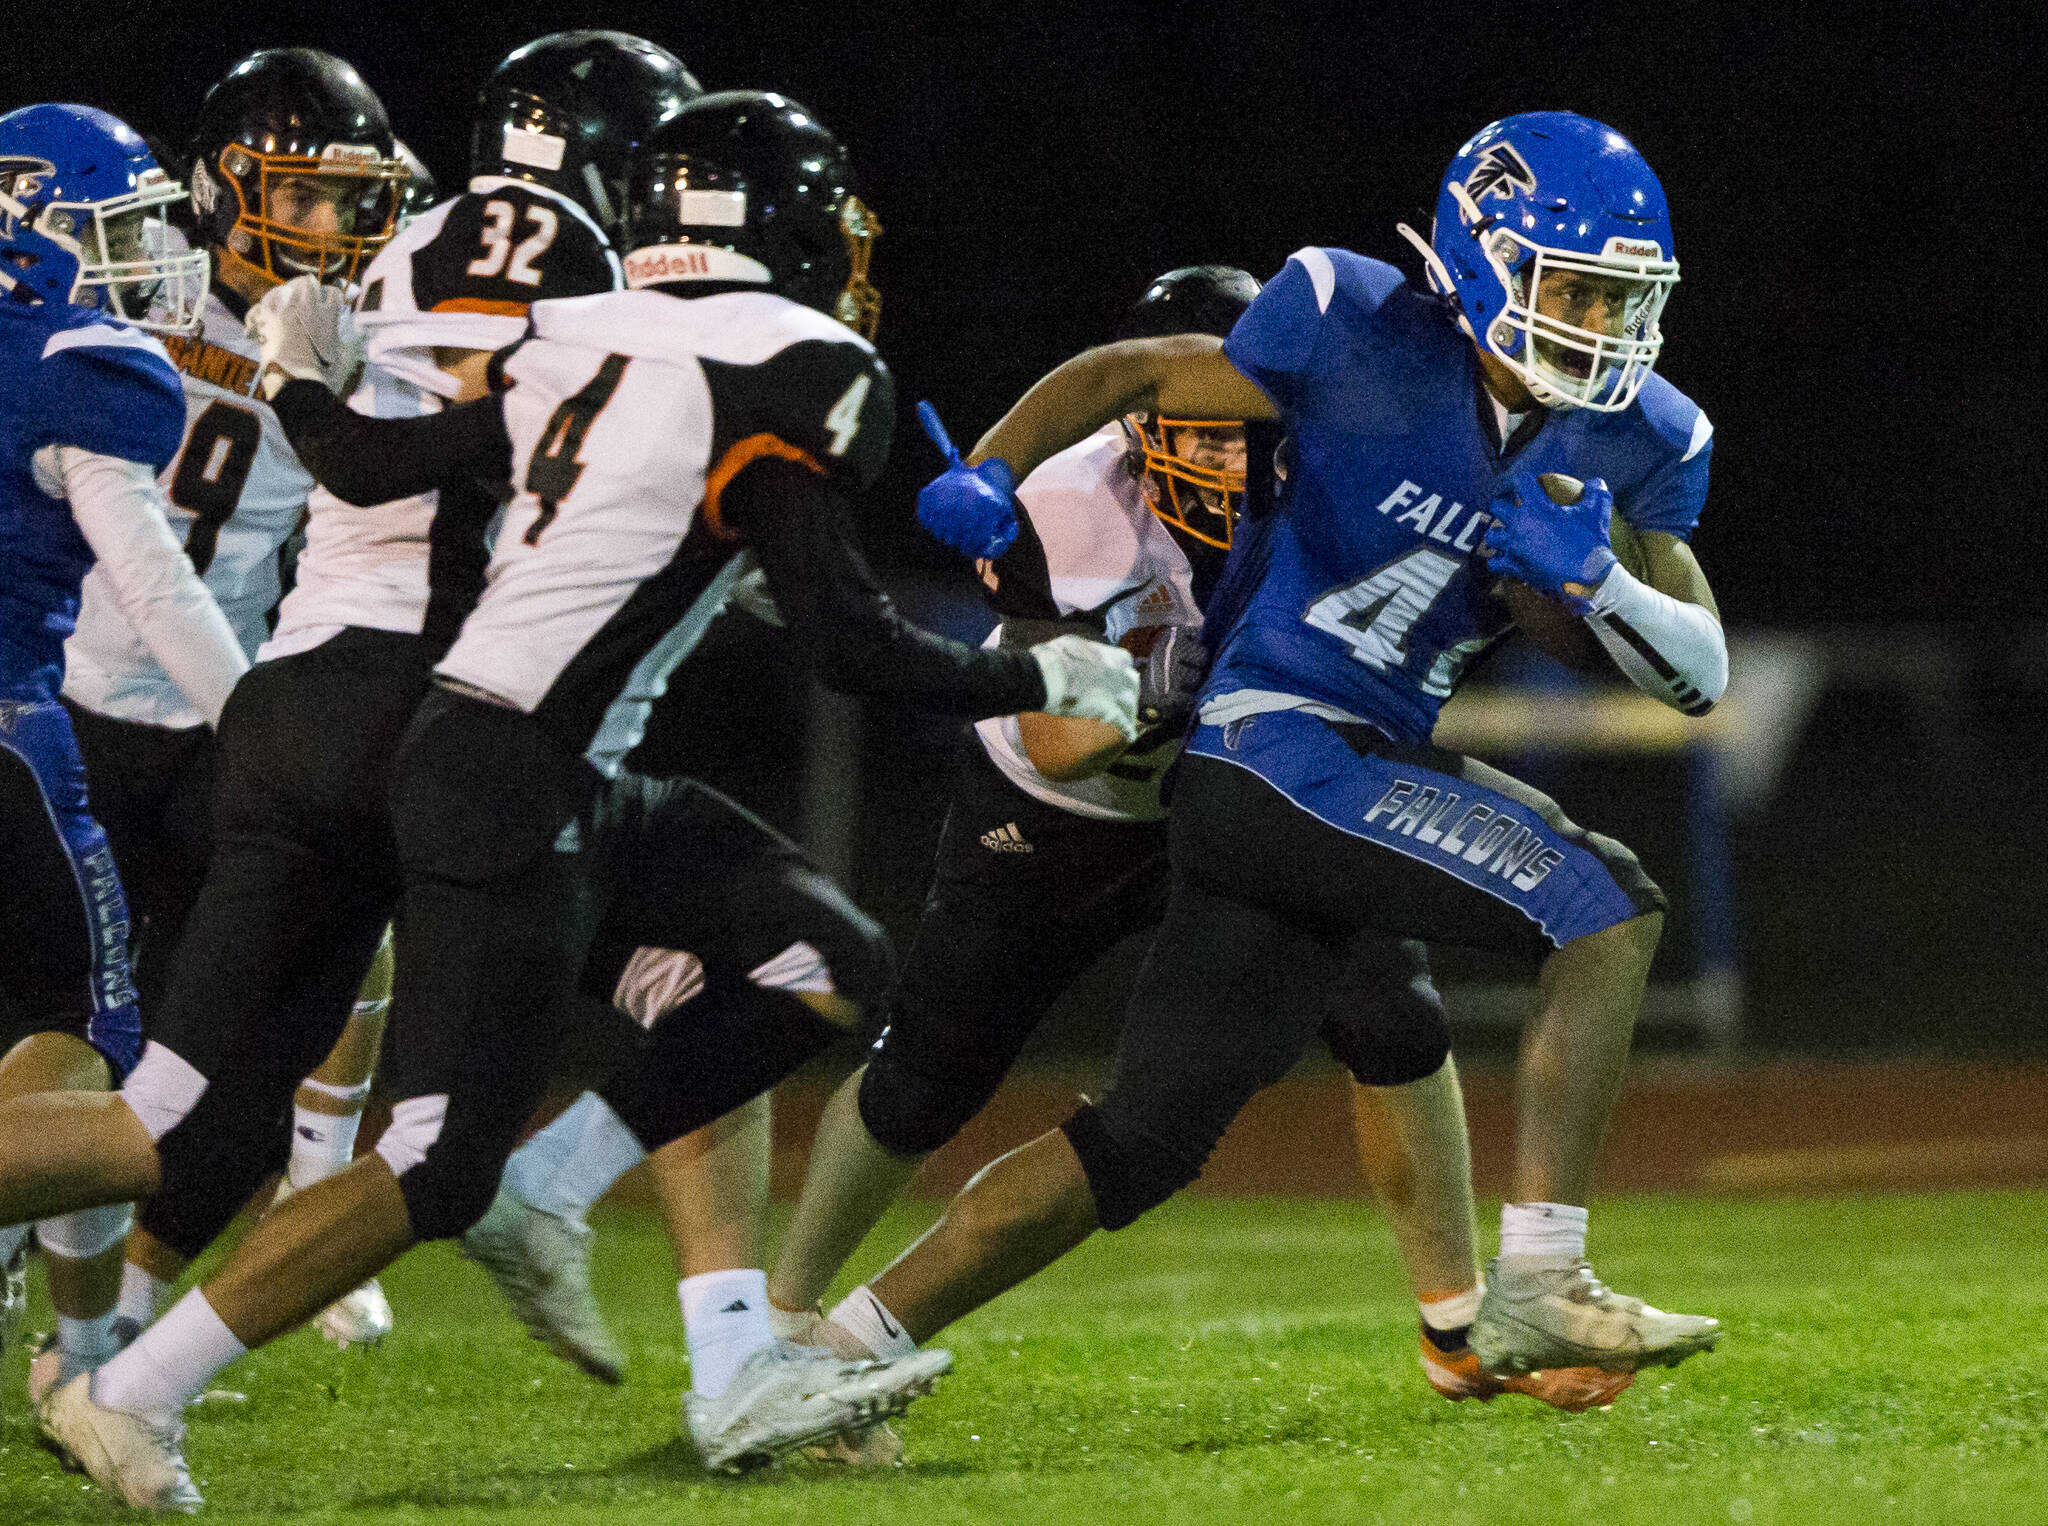 South Whidbey's Cole Tschetter escapes multiple tackles during the game against Granite Falls on Friday, Oct. 29, 2021 in Langley, Wa. (Olivia Vanni / The Herald)